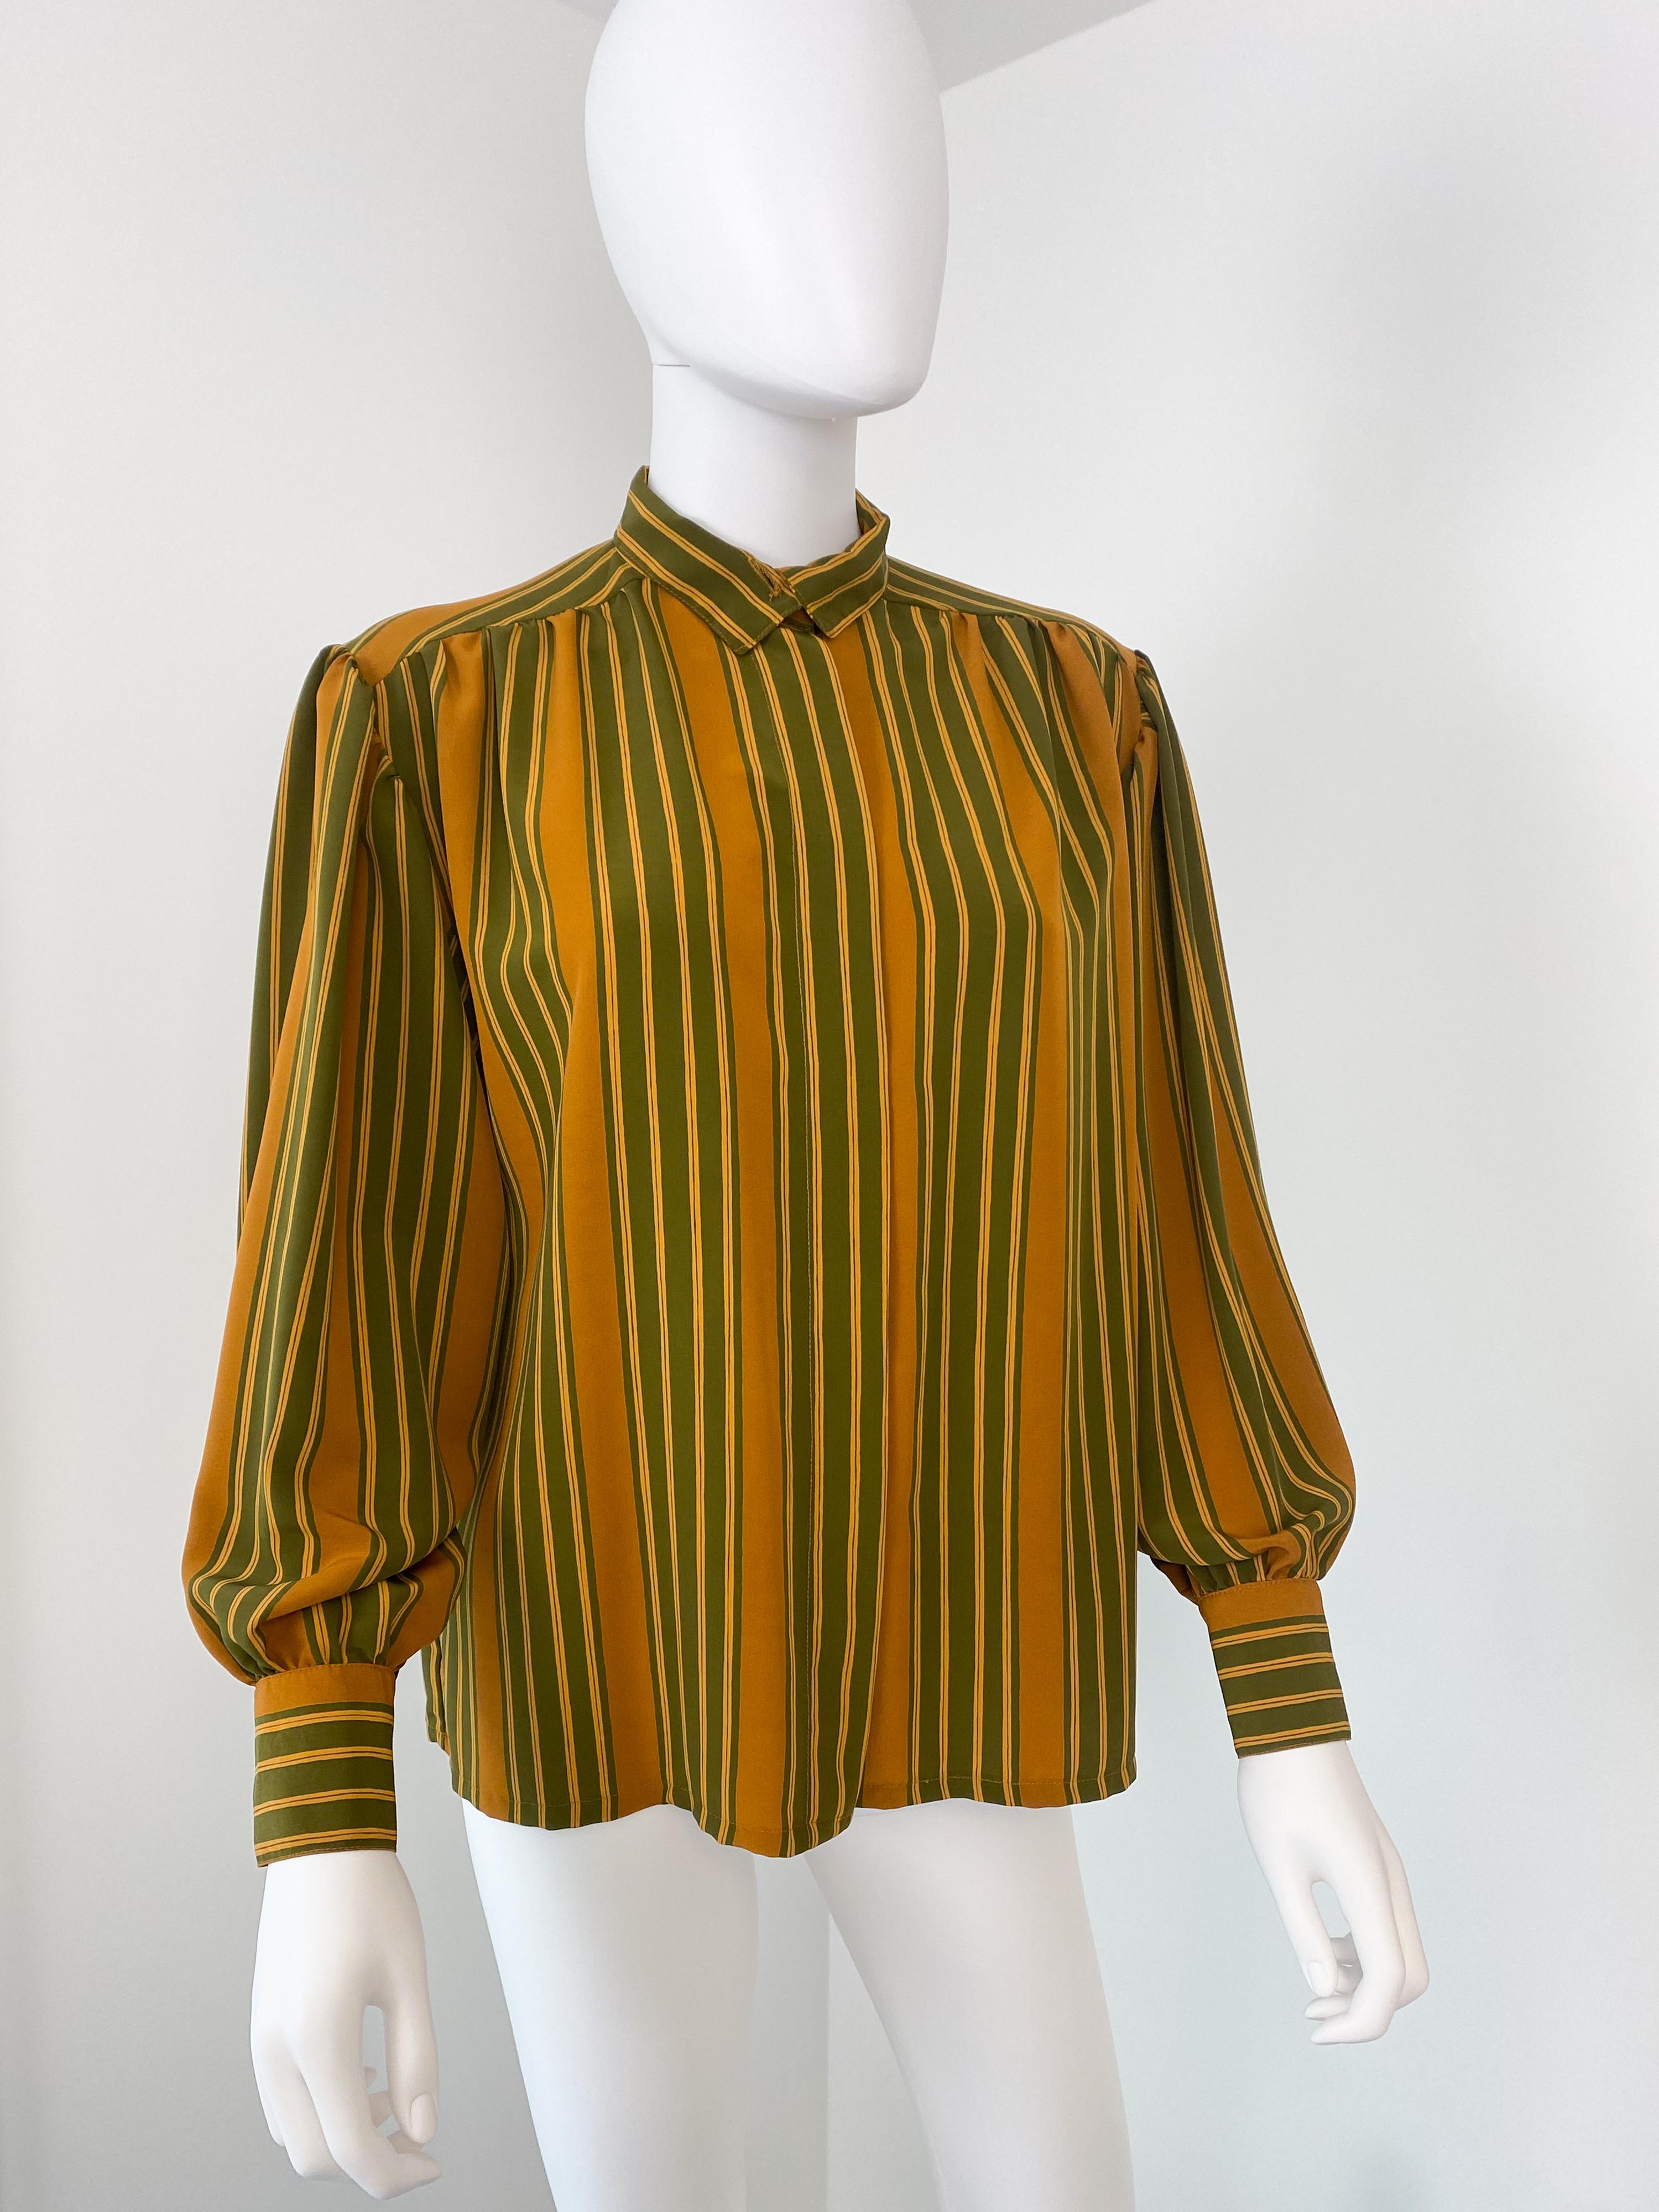 Vintage 1980s Silky Polyester Blouse Top Green and Saffran Stripes Size 10/12 For Sale 1